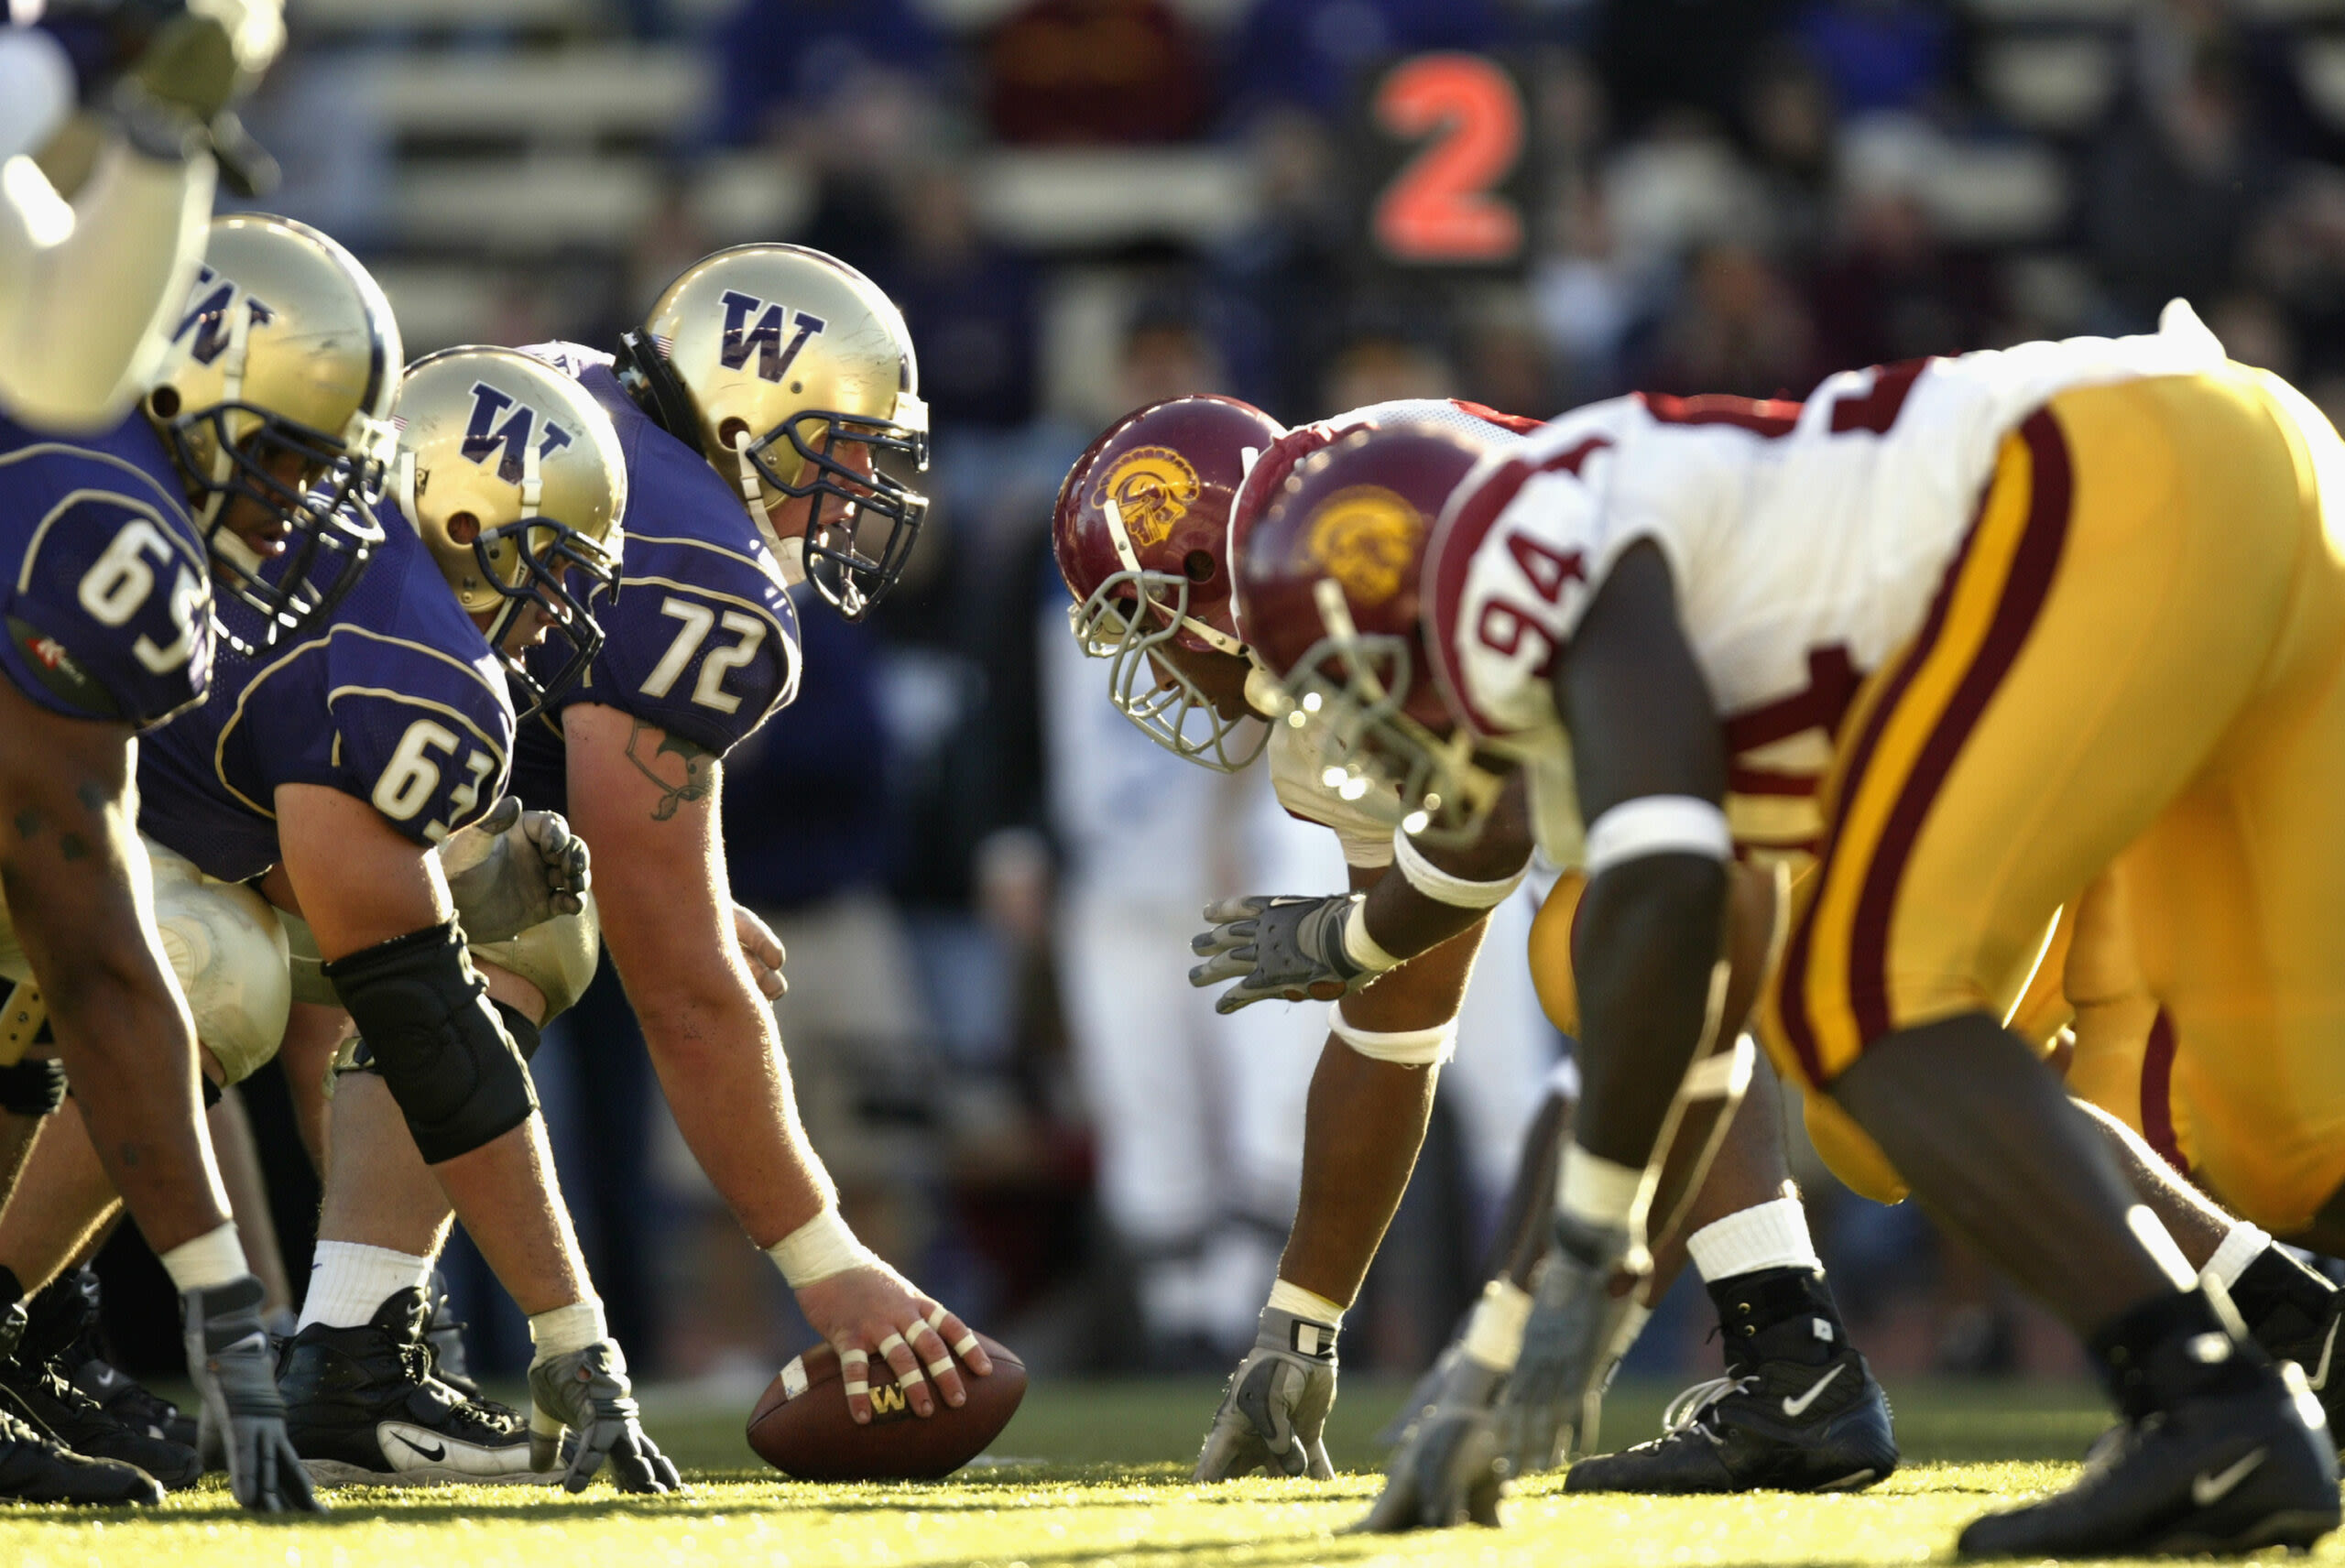 Trojans Wire talks to UW Huskies wire about the past and future at USC and Washington